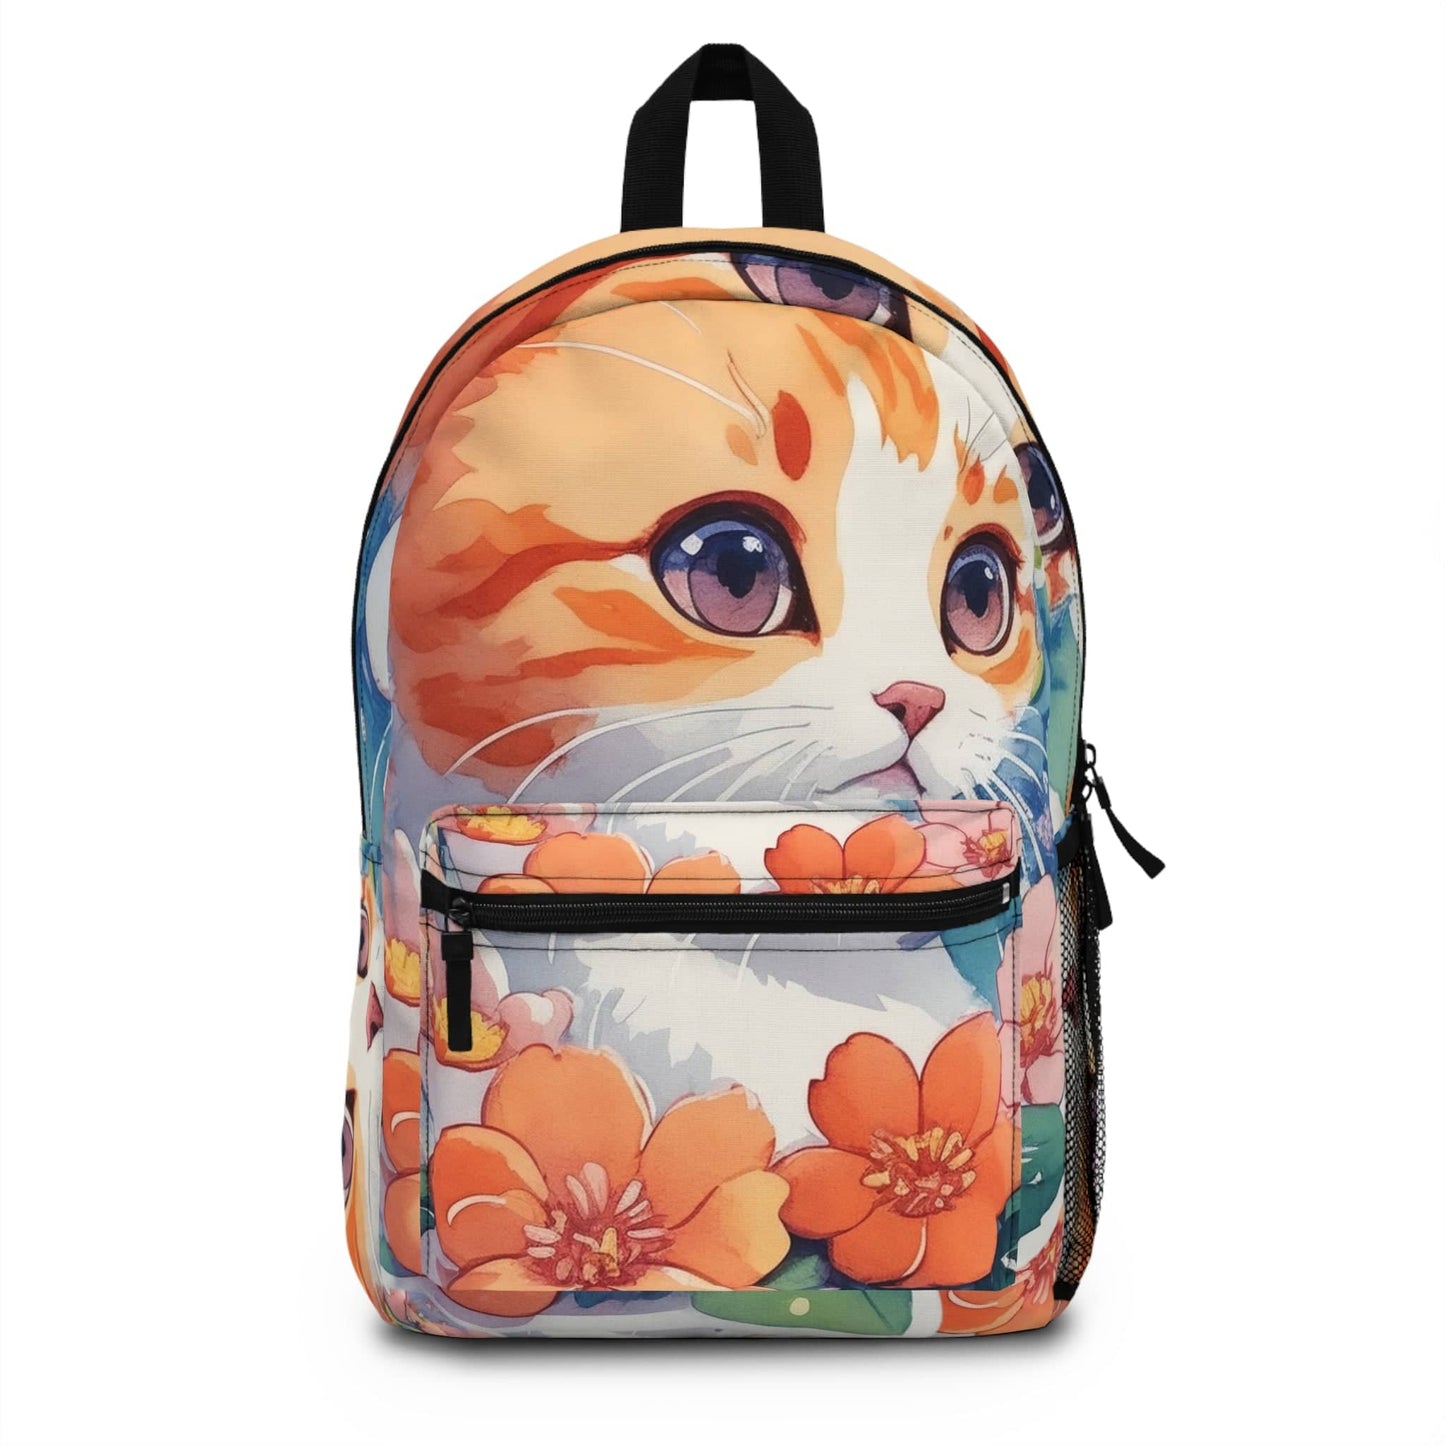 "KittyCute: The Adorable Kitten Backpack for School, Travel, Work, and Leisure - The Ultimate Style Statement for Cat Lovers" Bags Bigger Than Life   